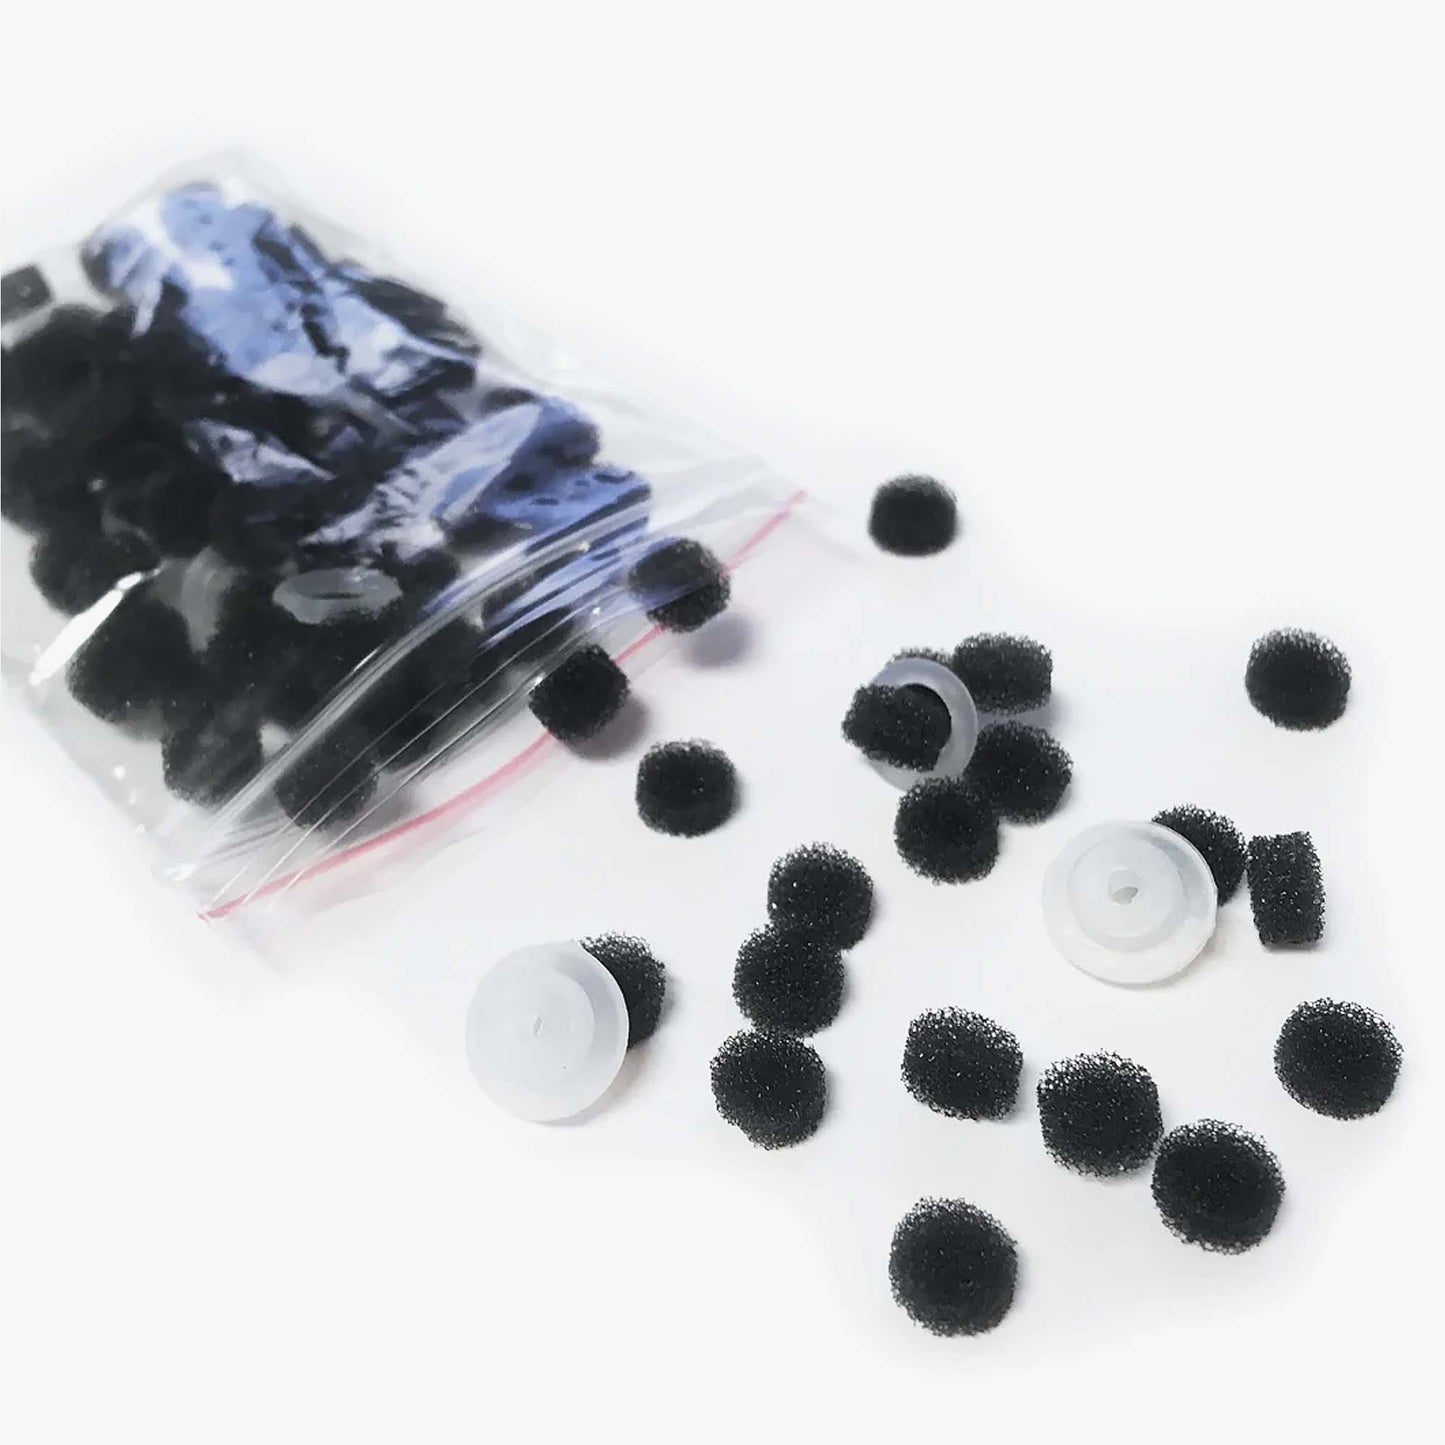 A bag of BELLA Complete Set of Replacement Filters, Caps and O-rings on a white surface by Spa Sciences.